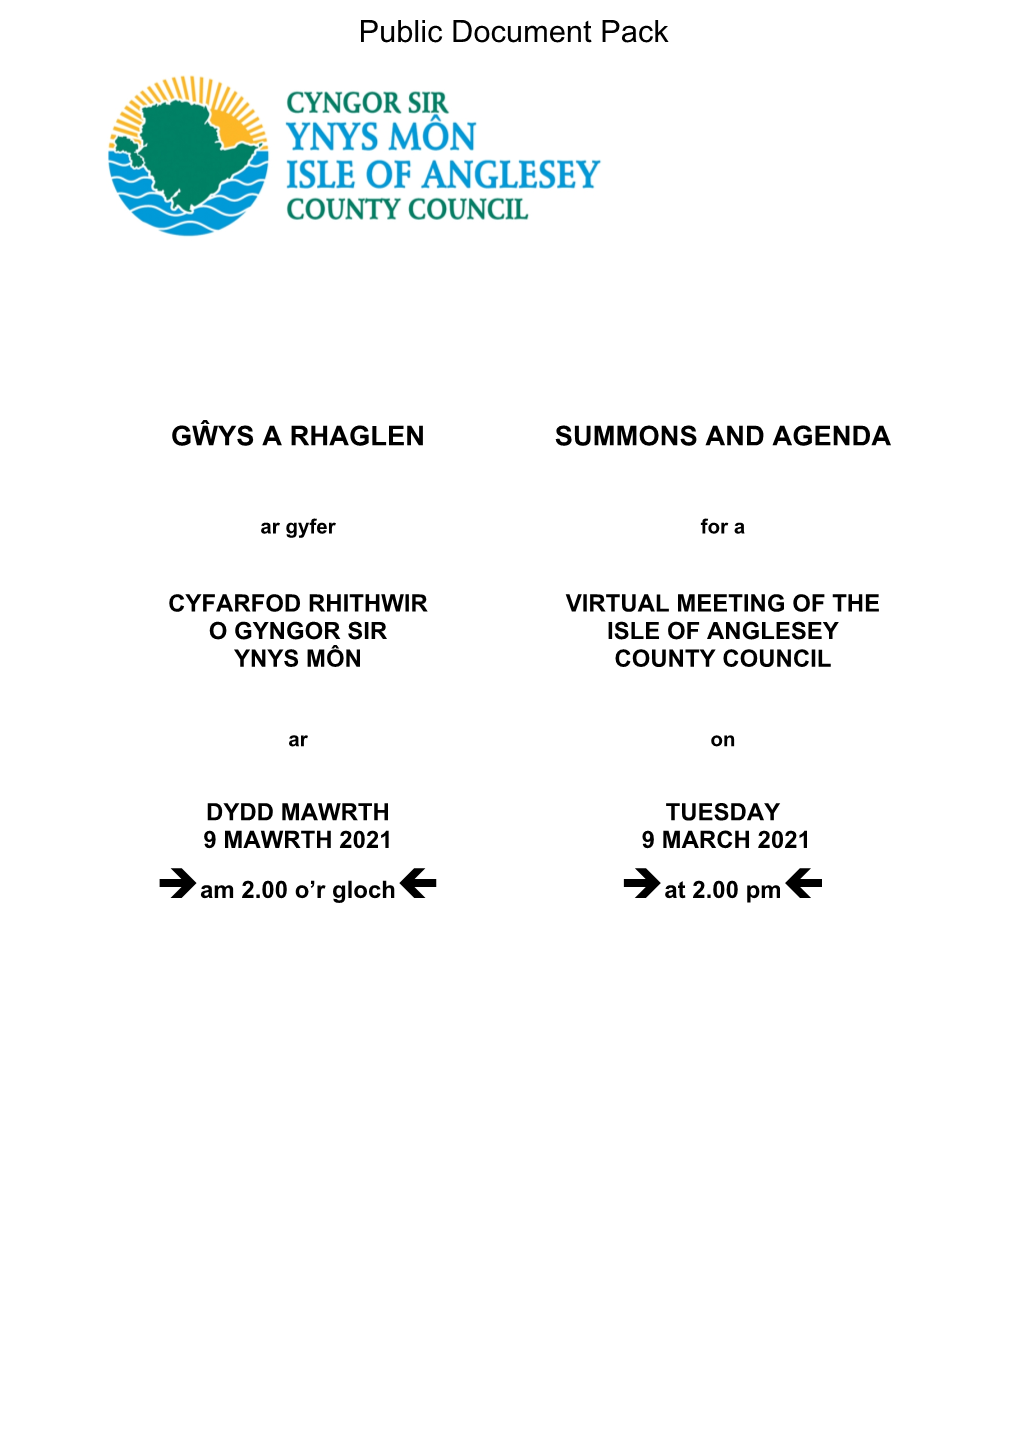 (Public Pack)Agenda Document for Isle of Anglesey County Council, 09/03/2021 14:00